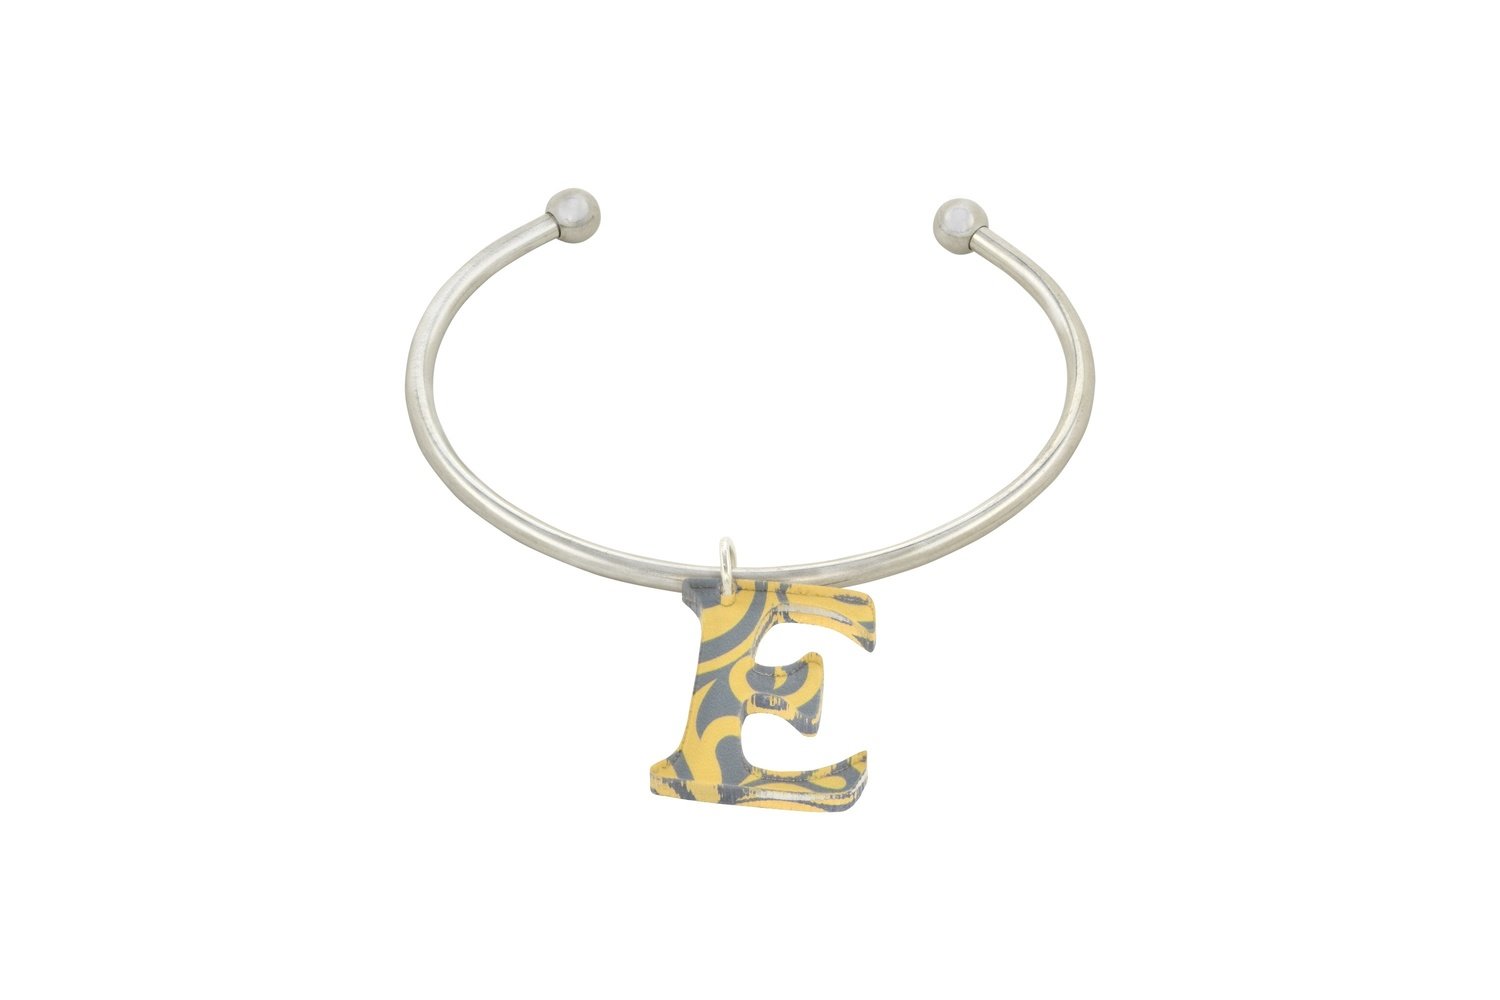 Sculpted Alphabet Charm with Stainless Steel Cuff Bracelet